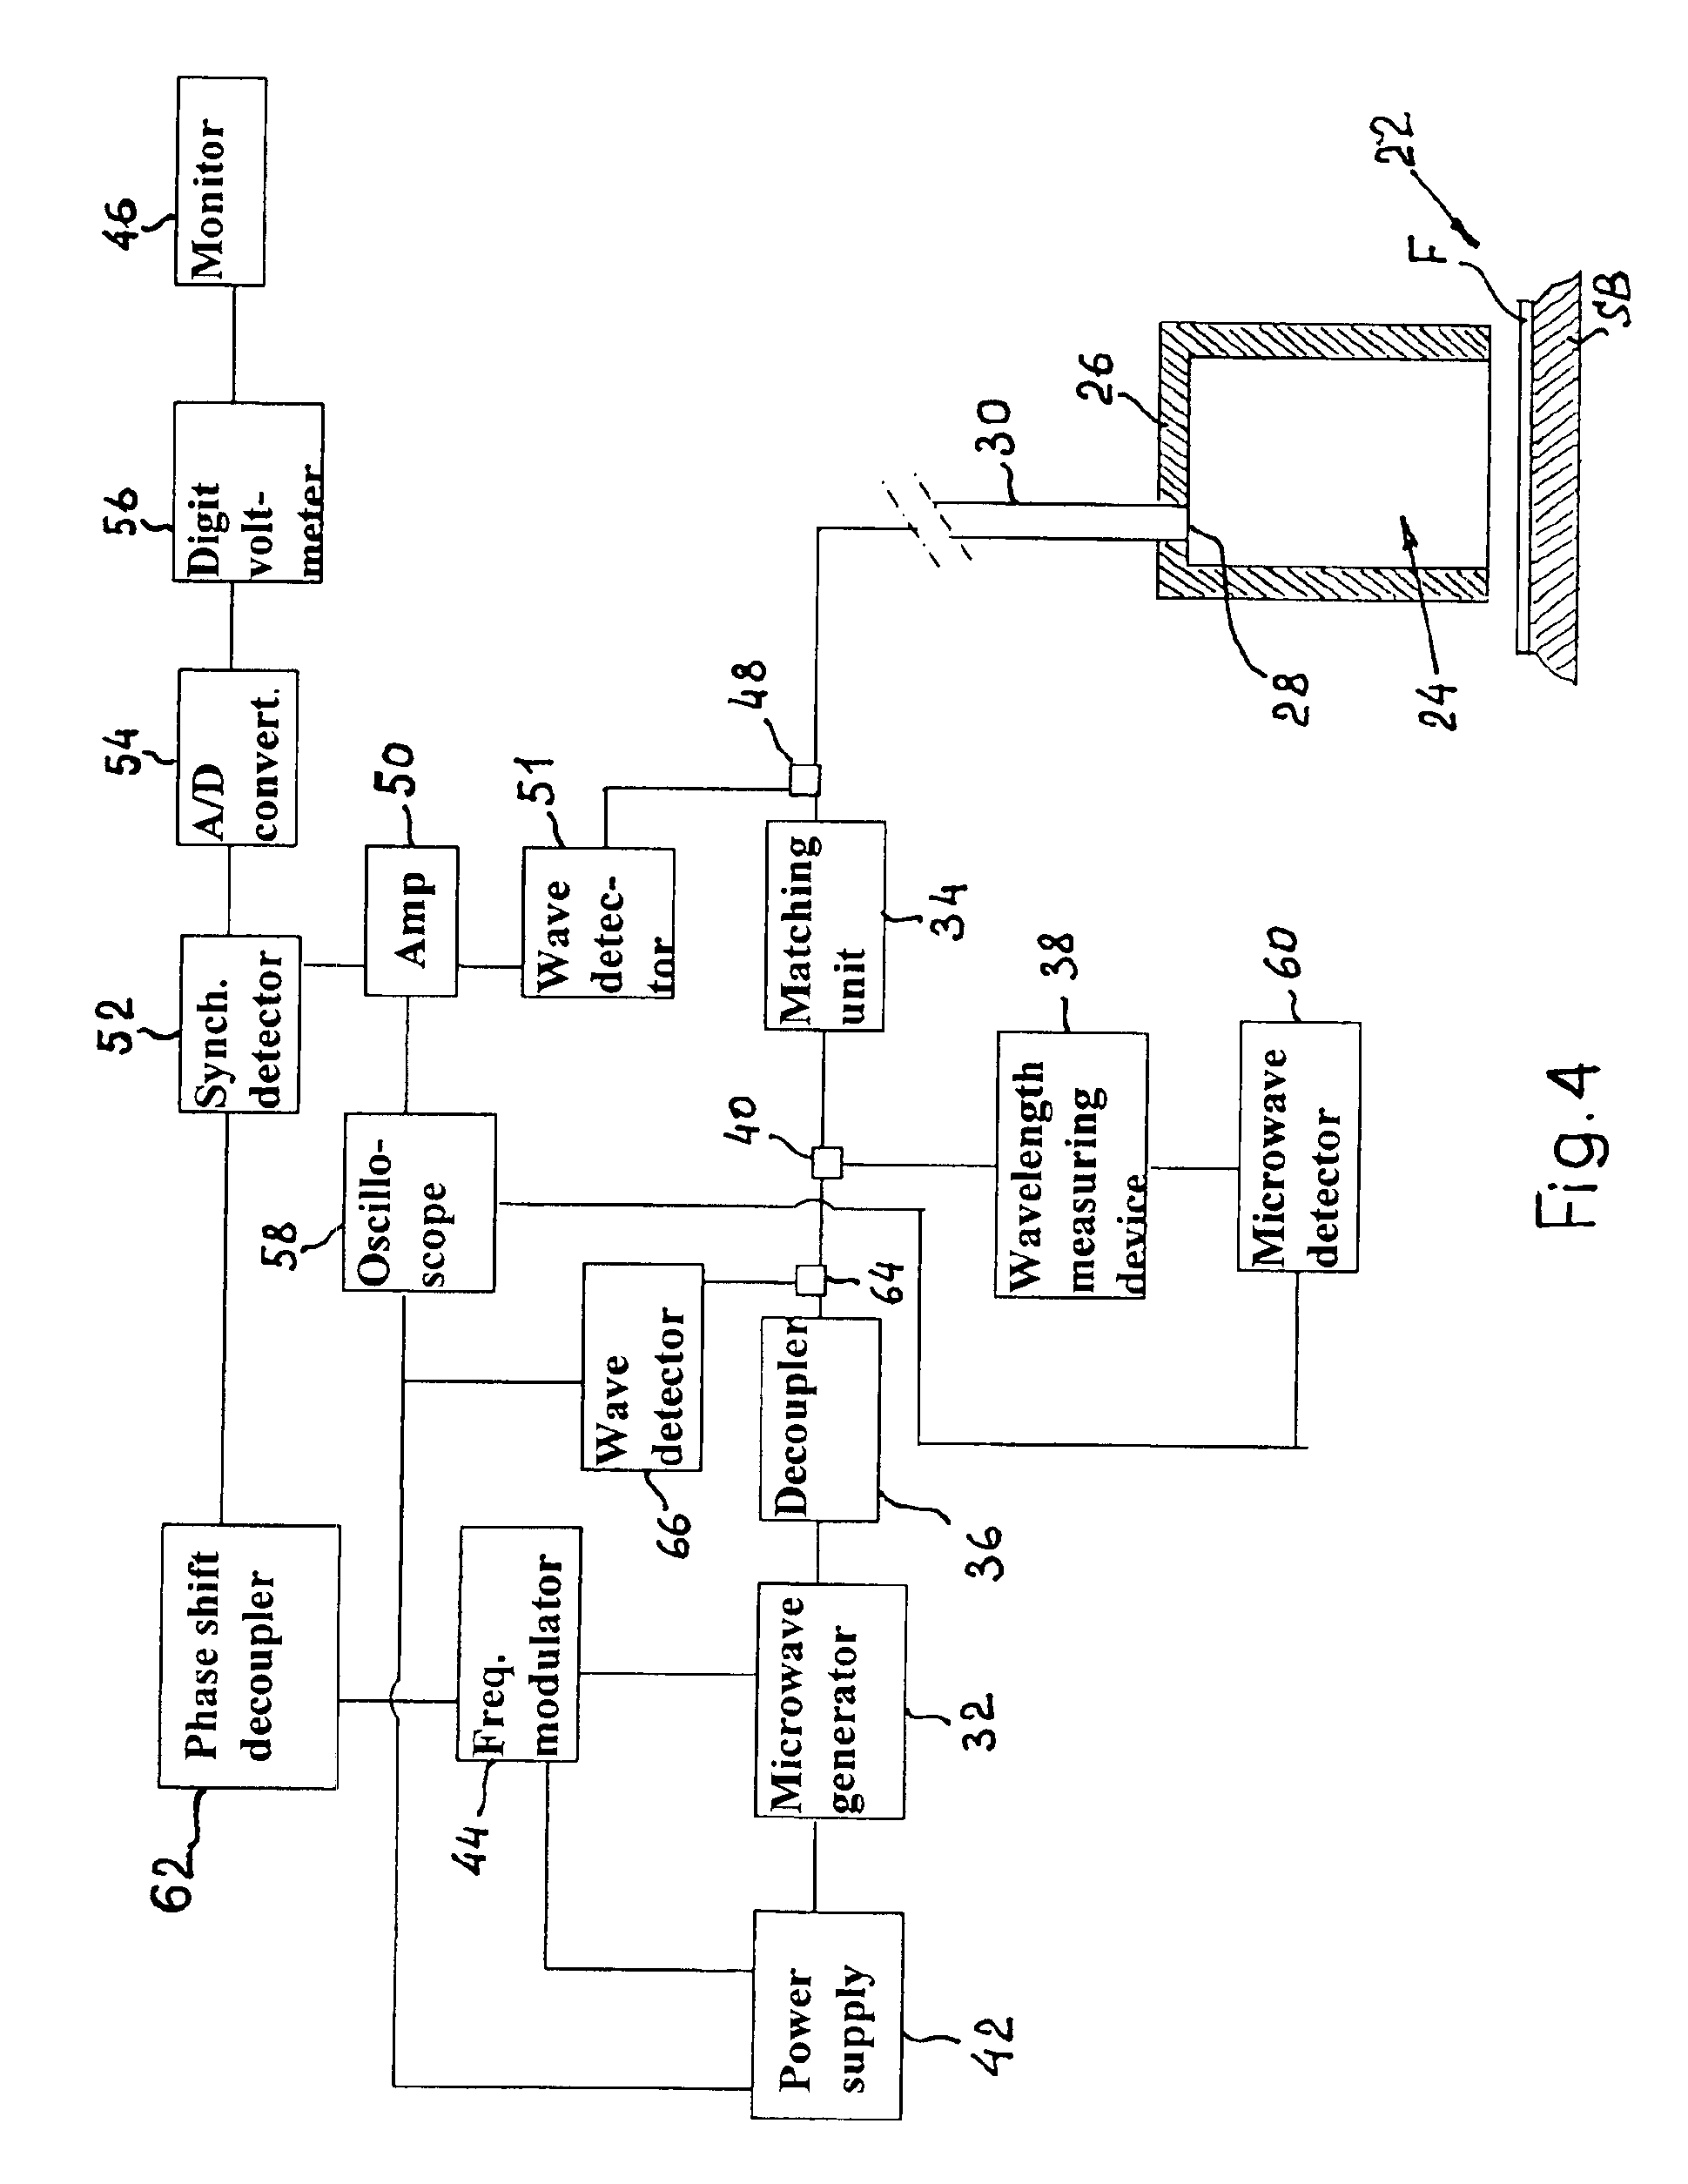 Method and apparatus for precision measurement of film thickness